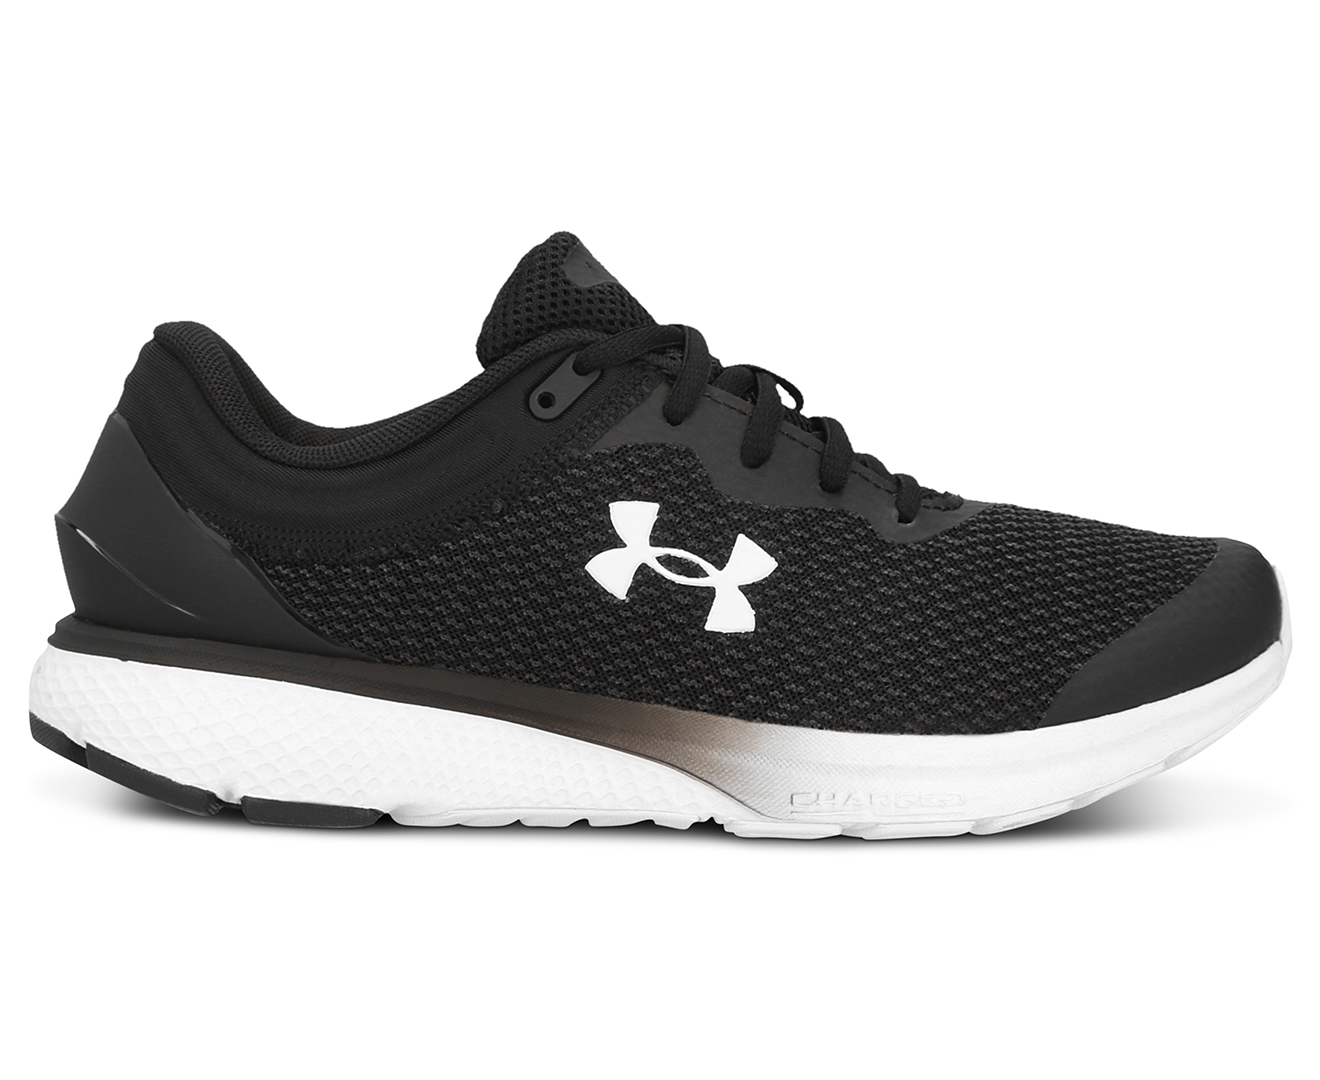 Under Armour Women's Charged Escape 3 Running Shoes Black/White